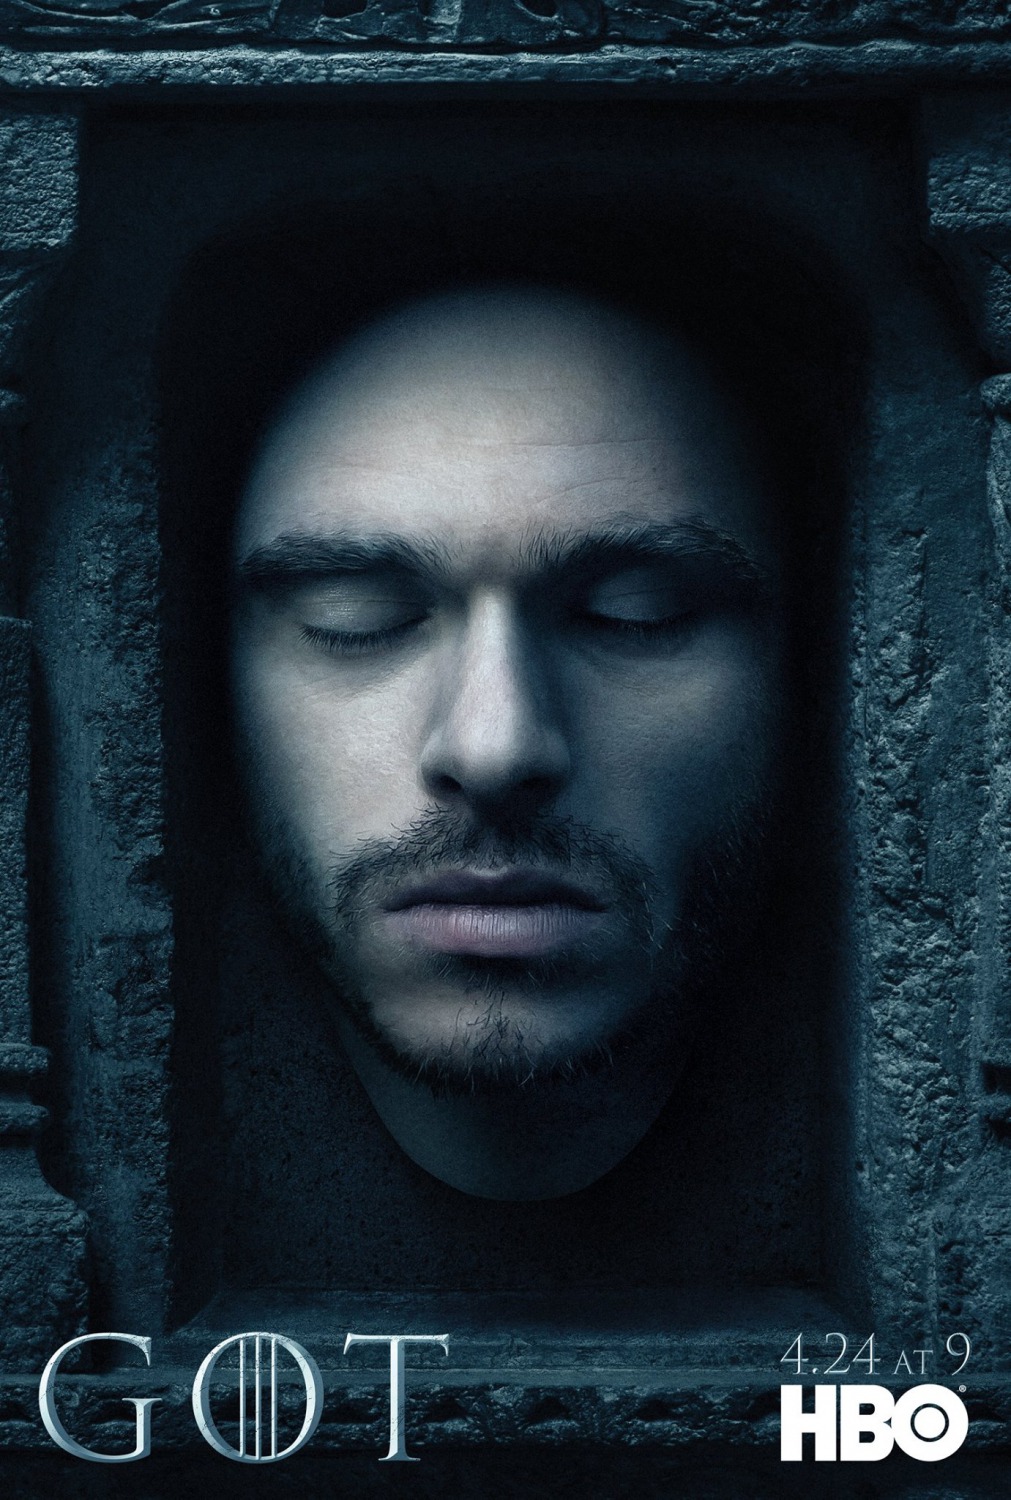 Extra Large TV Poster Image for Game of Thrones (#68 of 125)